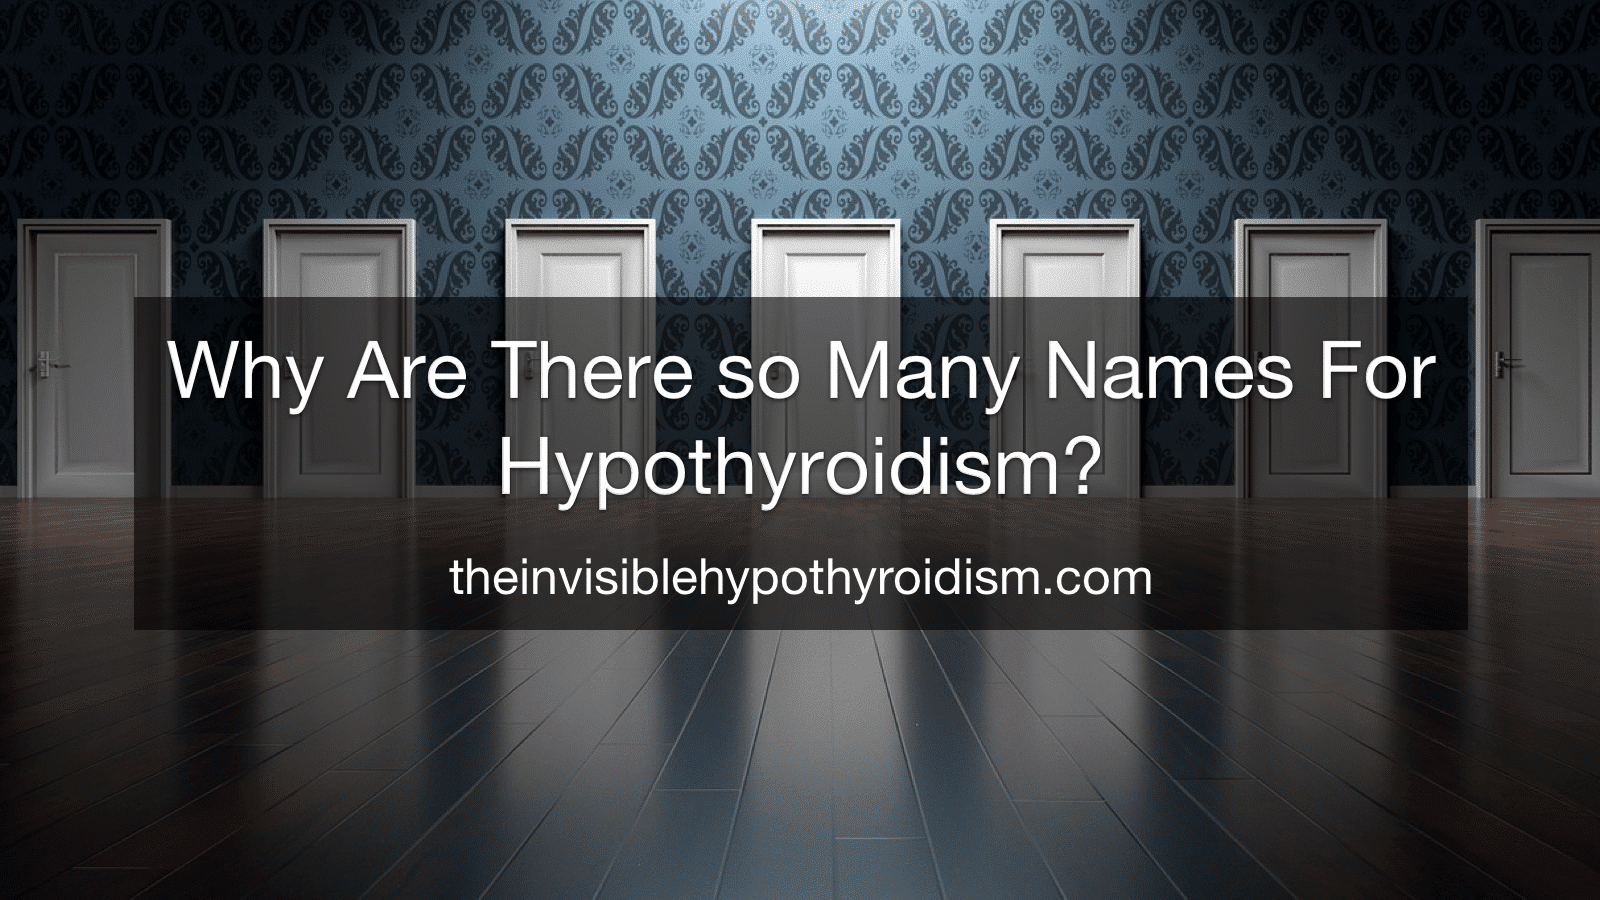 Why Are There so Many Names For Hypothyroidism?